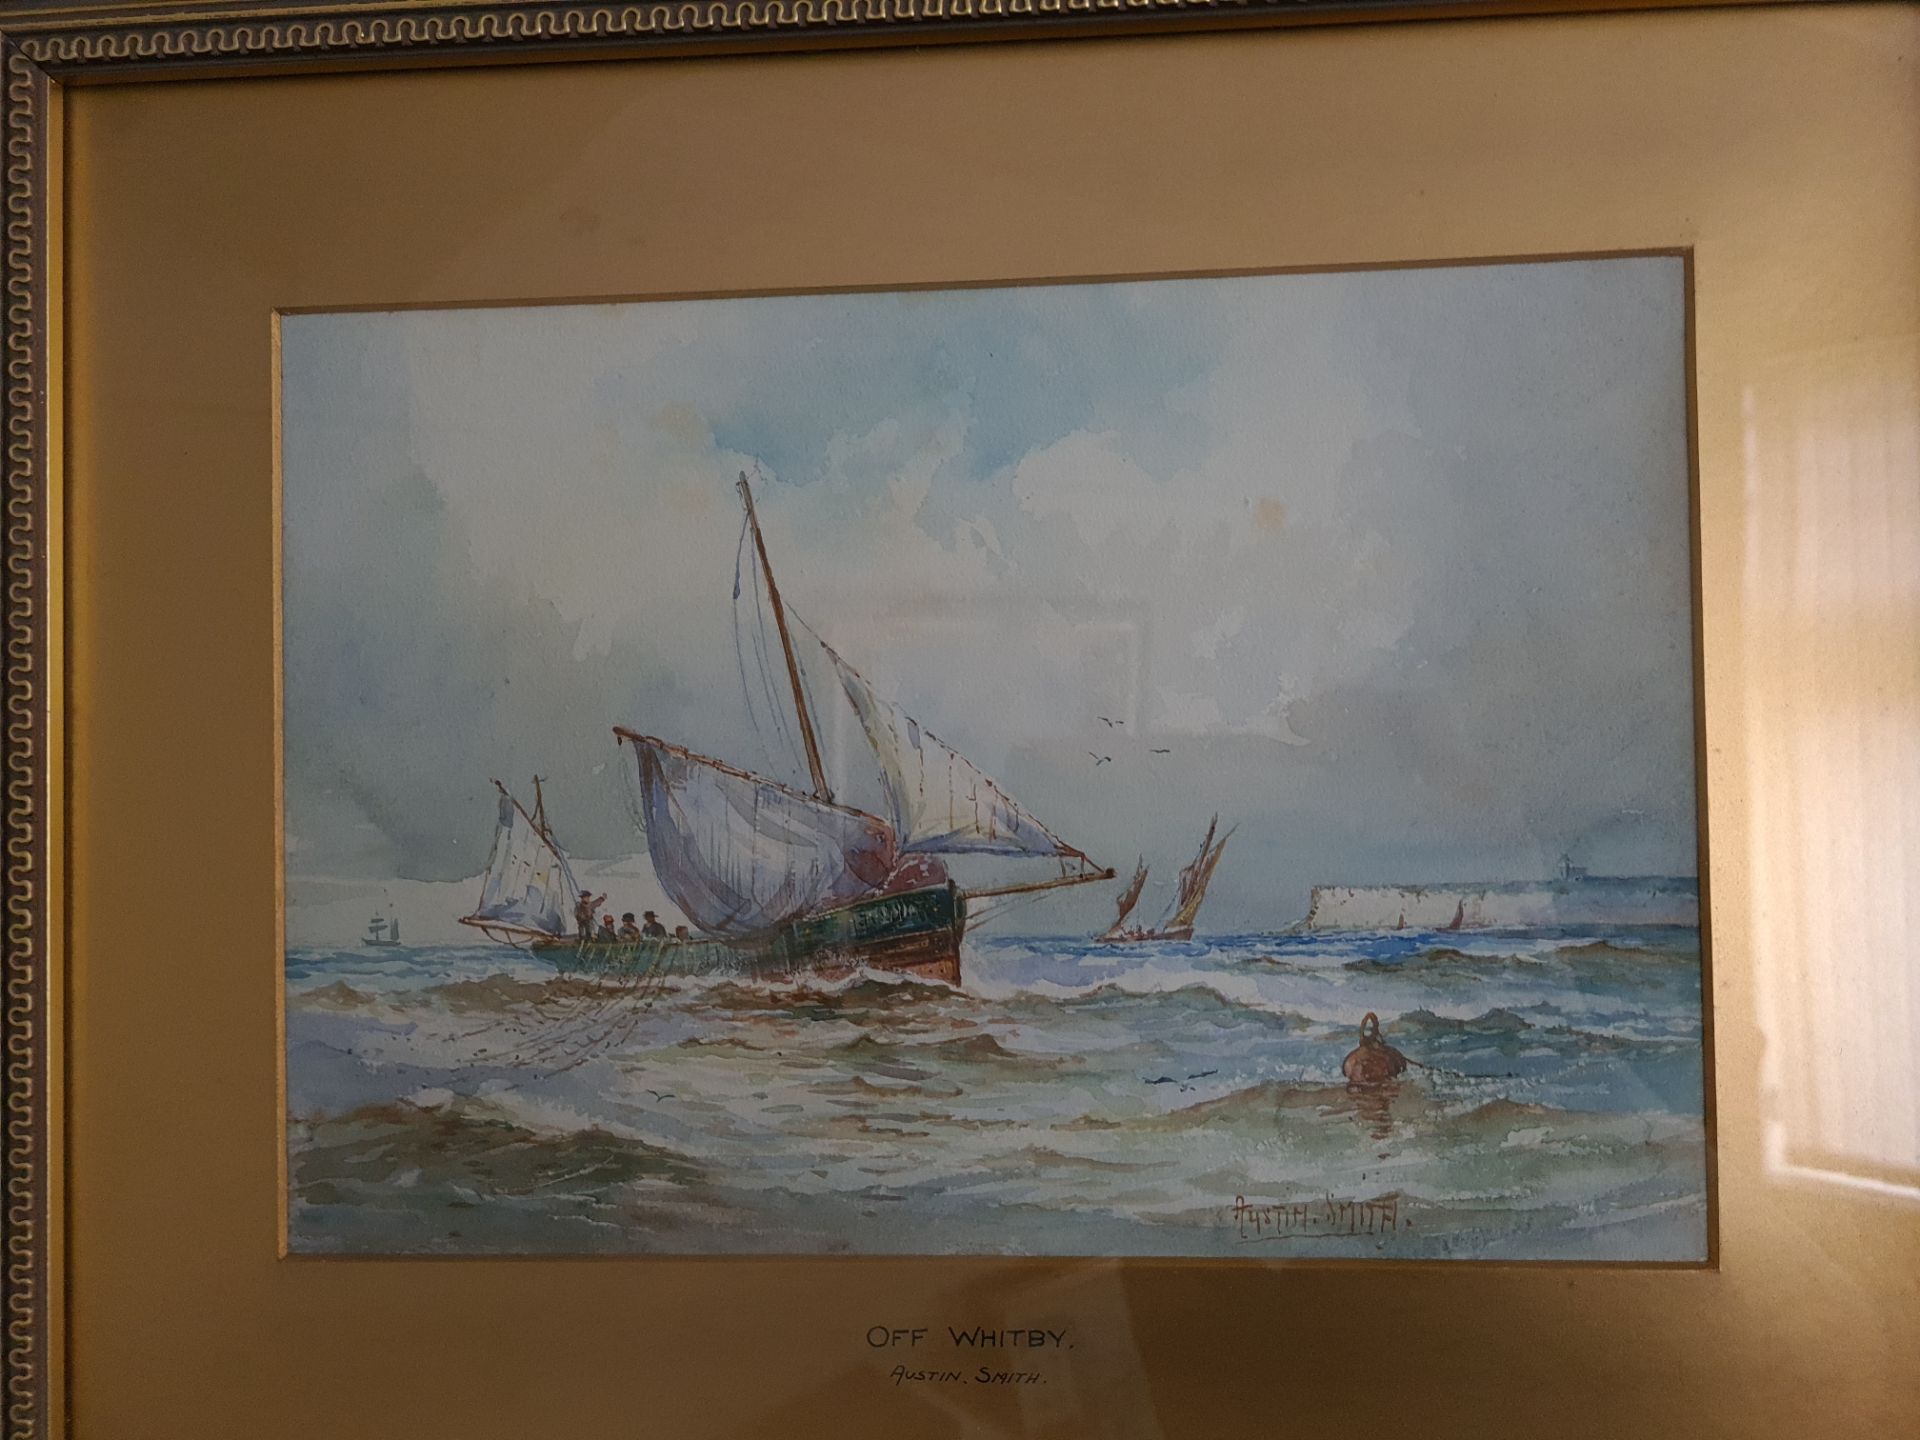 Signed and Titled Framed Watercolour 'Off Whitby' by Anton Smith, 37cm x 45cm - Image 2 of 4